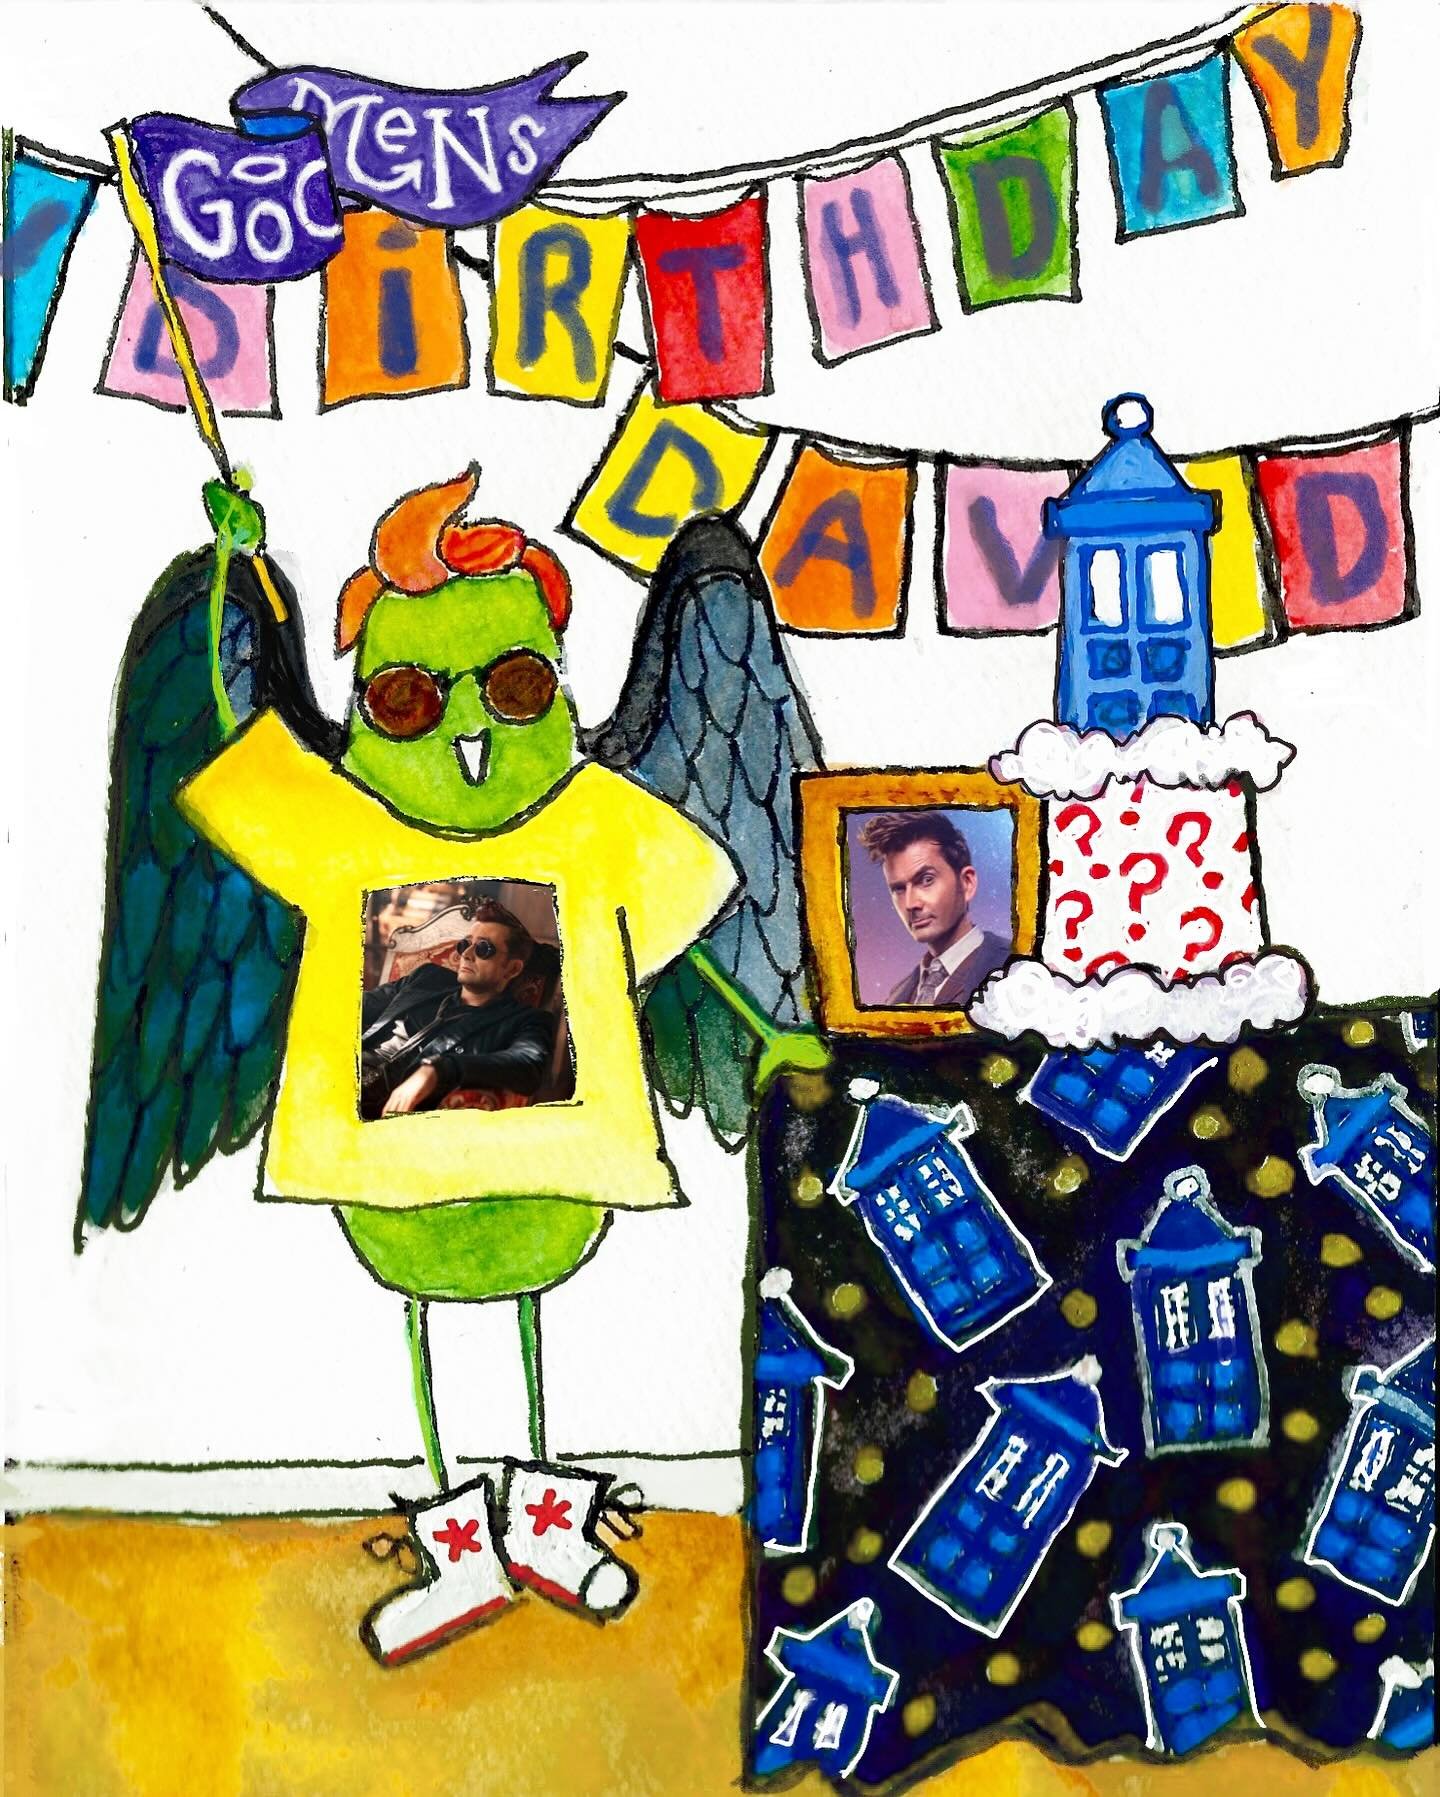 Prudence Pickle wants to wish her &lsquo;crush&rsquo; a happy birthday 🥳 can you guess WHO it is?? 
#prudencepickle #prudencepickleisback #doctorwho #thetenthdoctor #birthdaycelebrations🎉 #goodomens #virginiacreatesillustrations #happybirthdaydavid